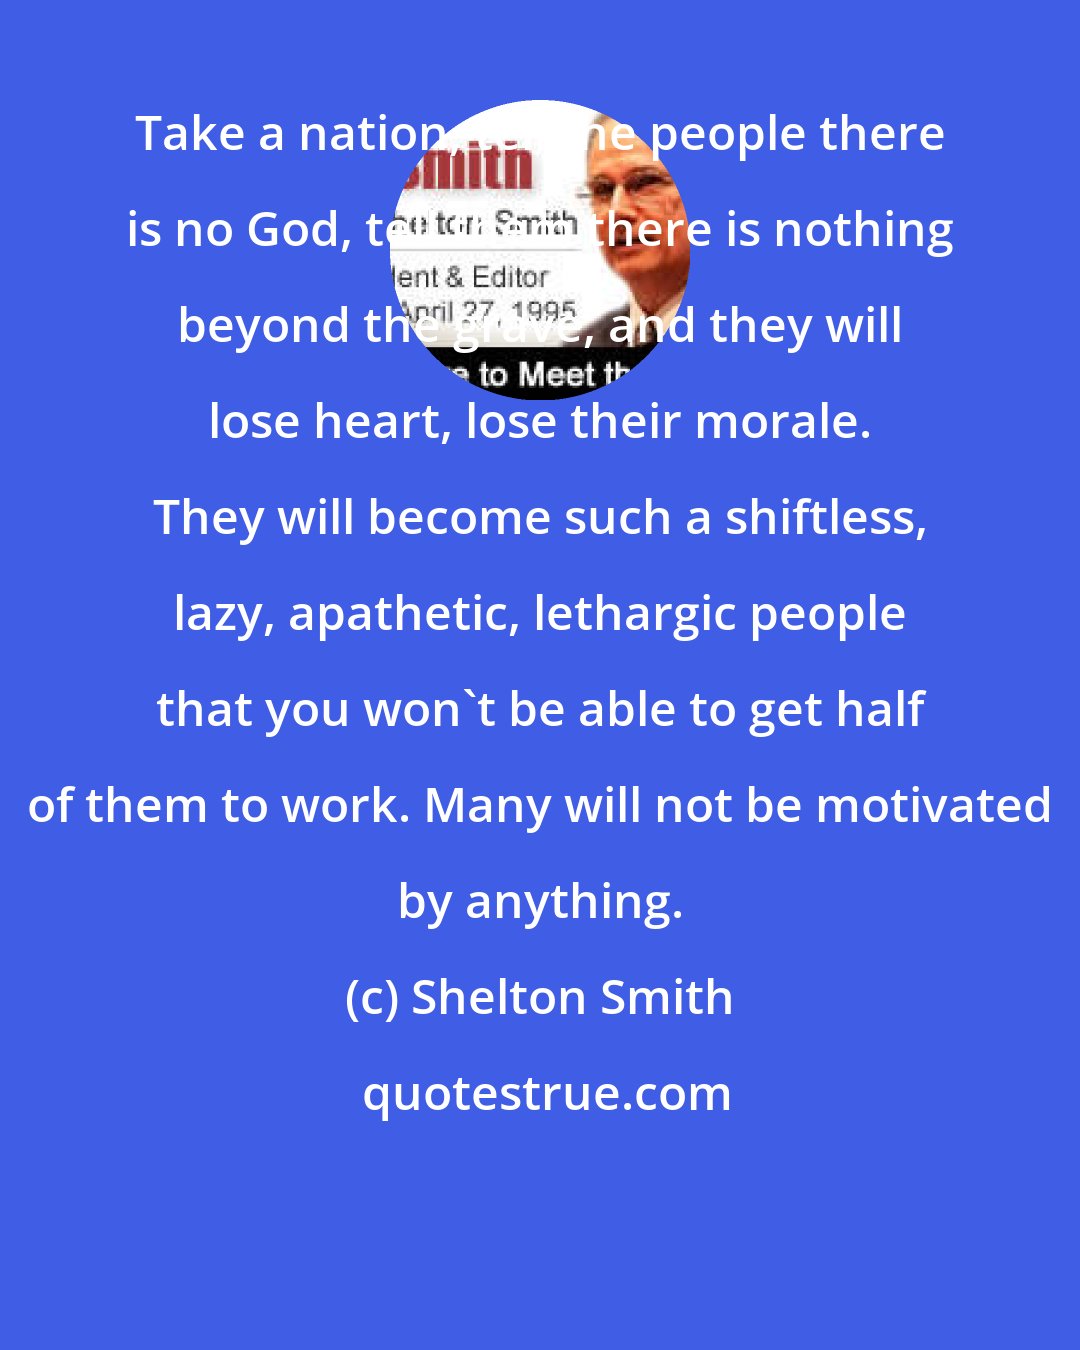 Shelton Smith: Take a nation, tell the people there is no God, tell them there is nothing beyond the grave, and they will lose heart, lose their morale. They will become such a shiftless, lazy, apathetic, lethargic people that you won't be able to get half of them to work. Many will not be motivated by anything.